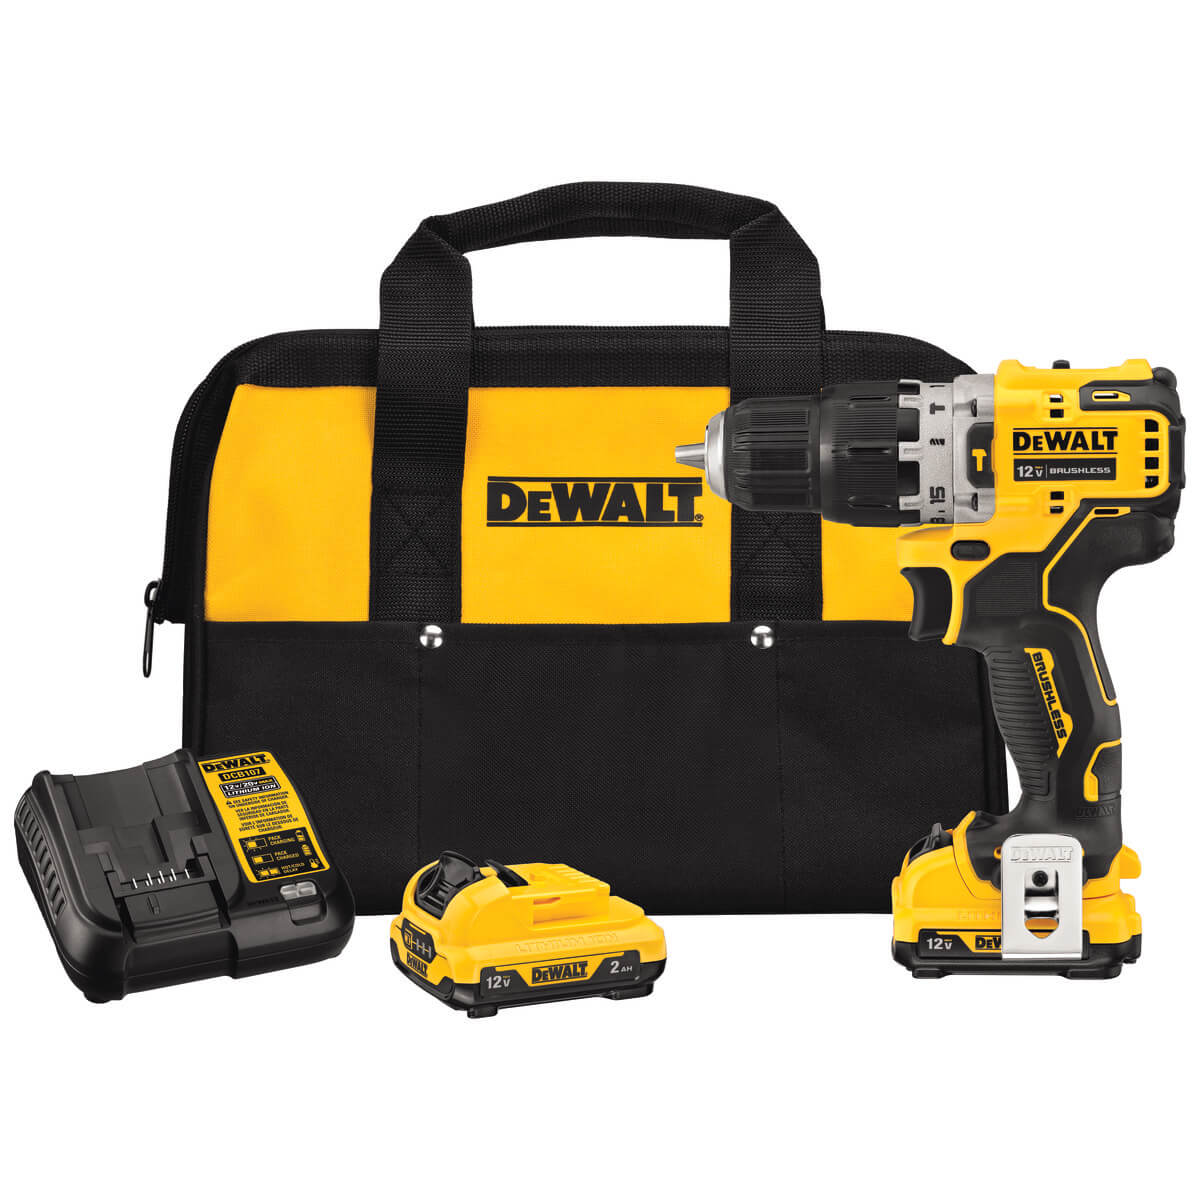 DEWALT DCD706F2 XTREME™ 12V MAX* BRUSHLESS 3/8 IN. CORDLESS HAMMER DRILL KIT - wise-line-tools